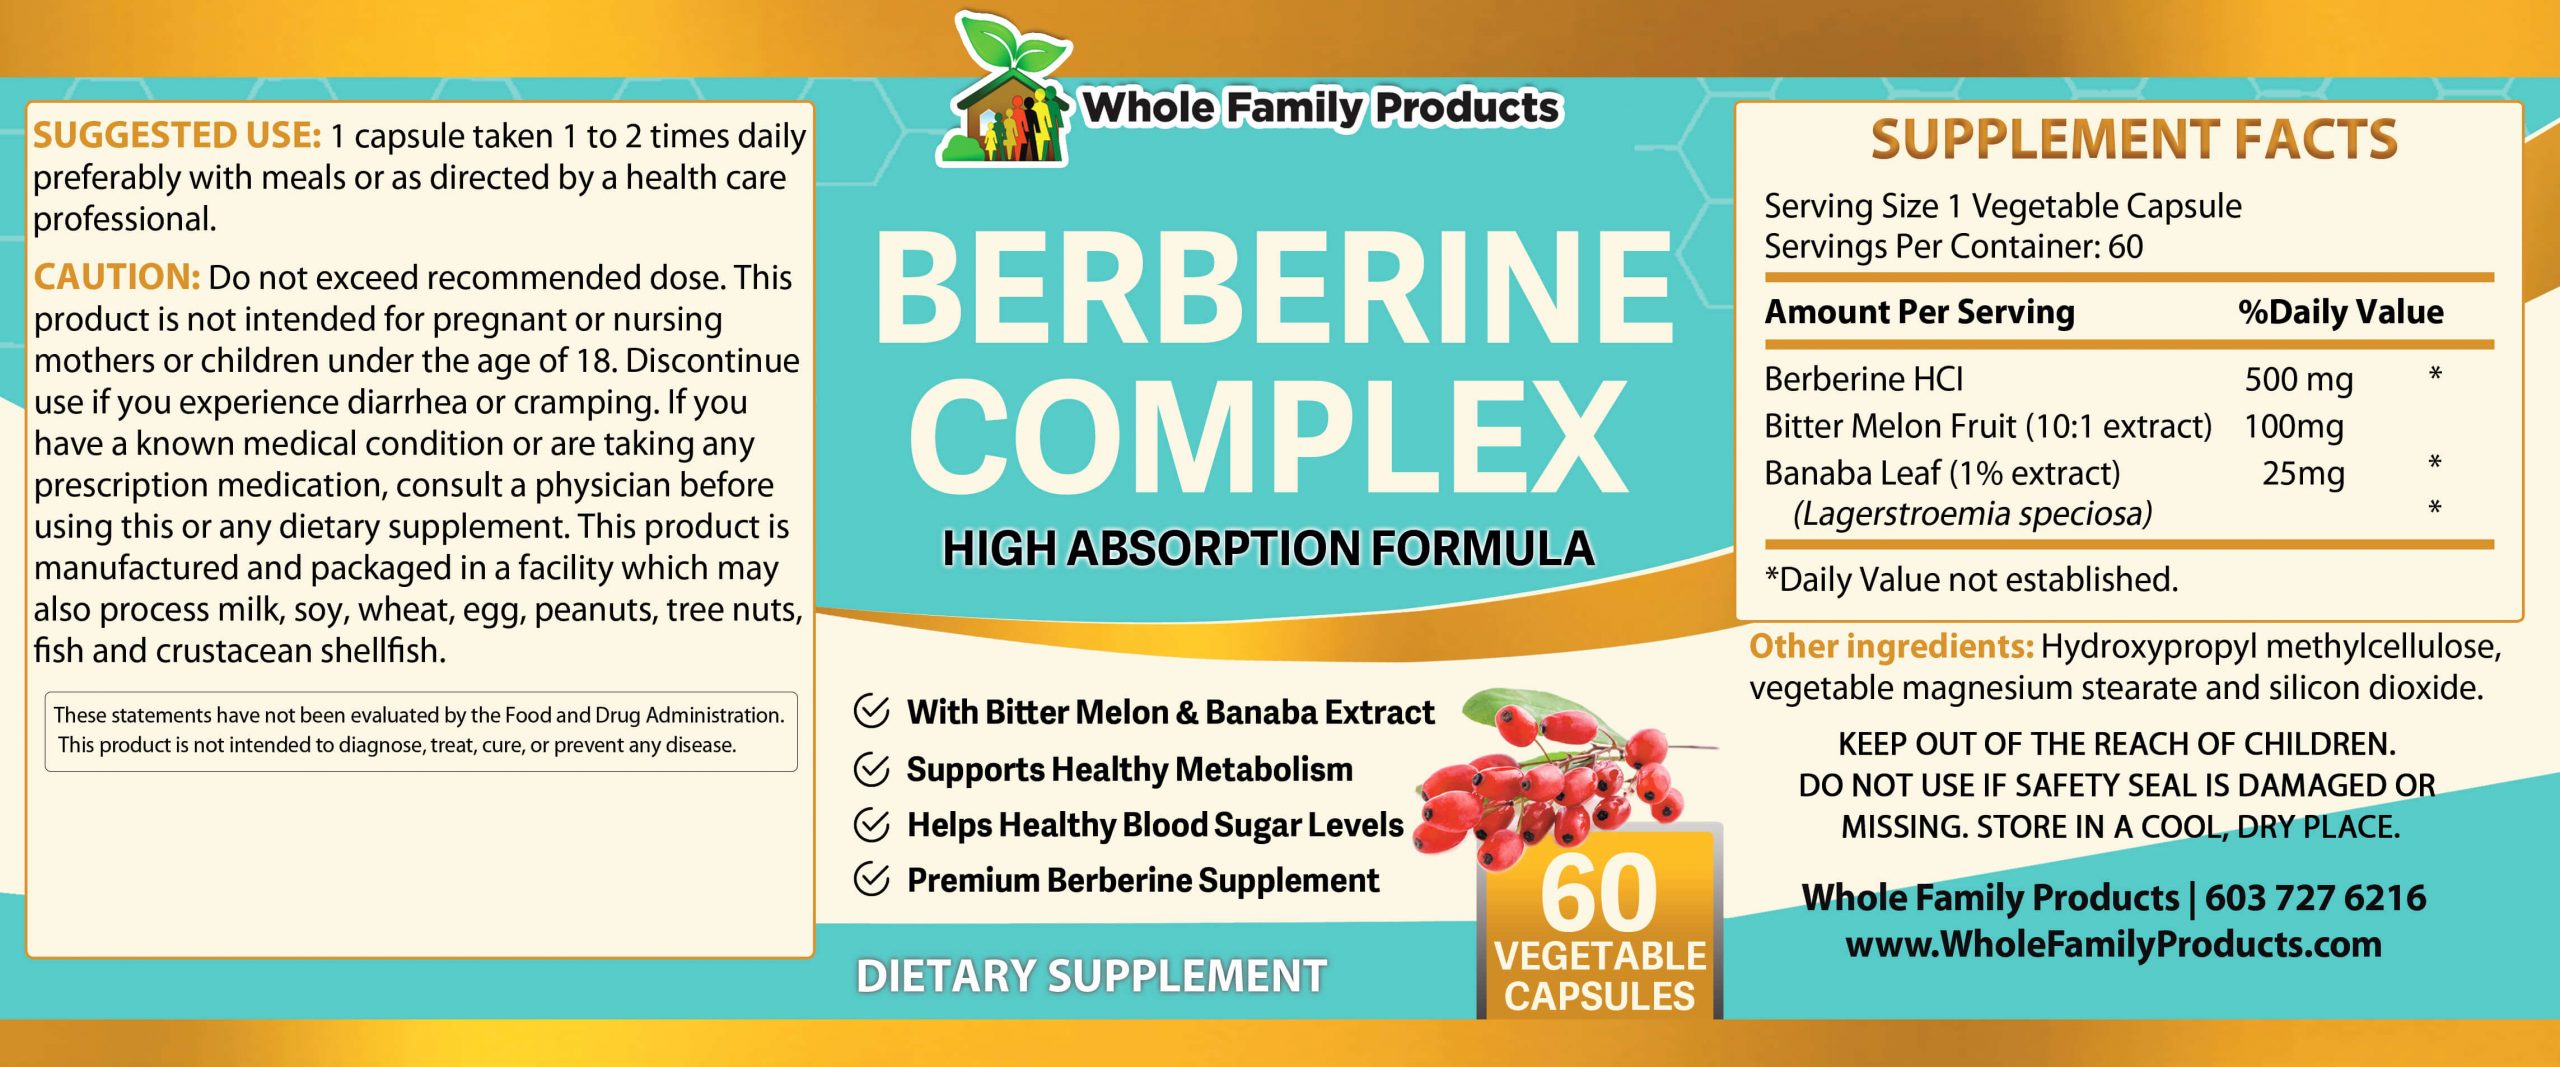 Berberine Complex Ingredients and Use Label